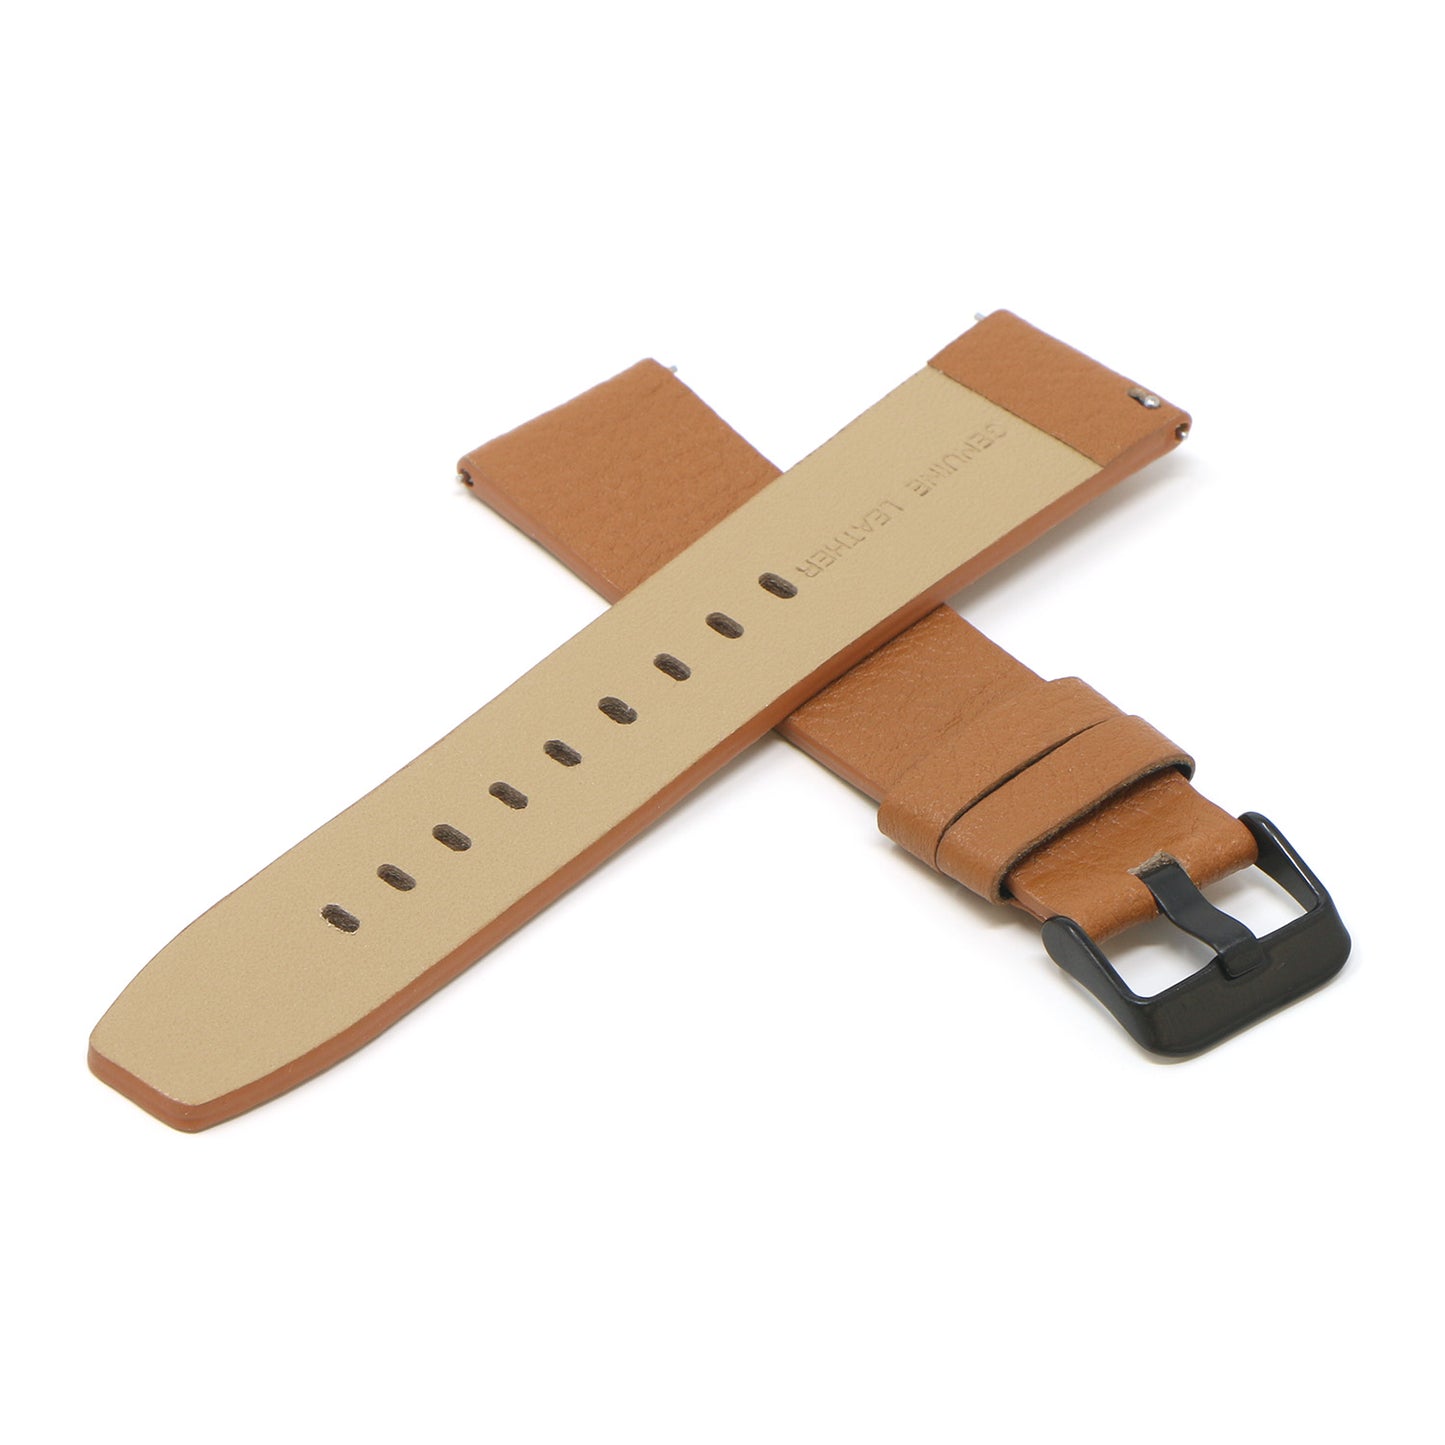 23mm Textured Leather Strap